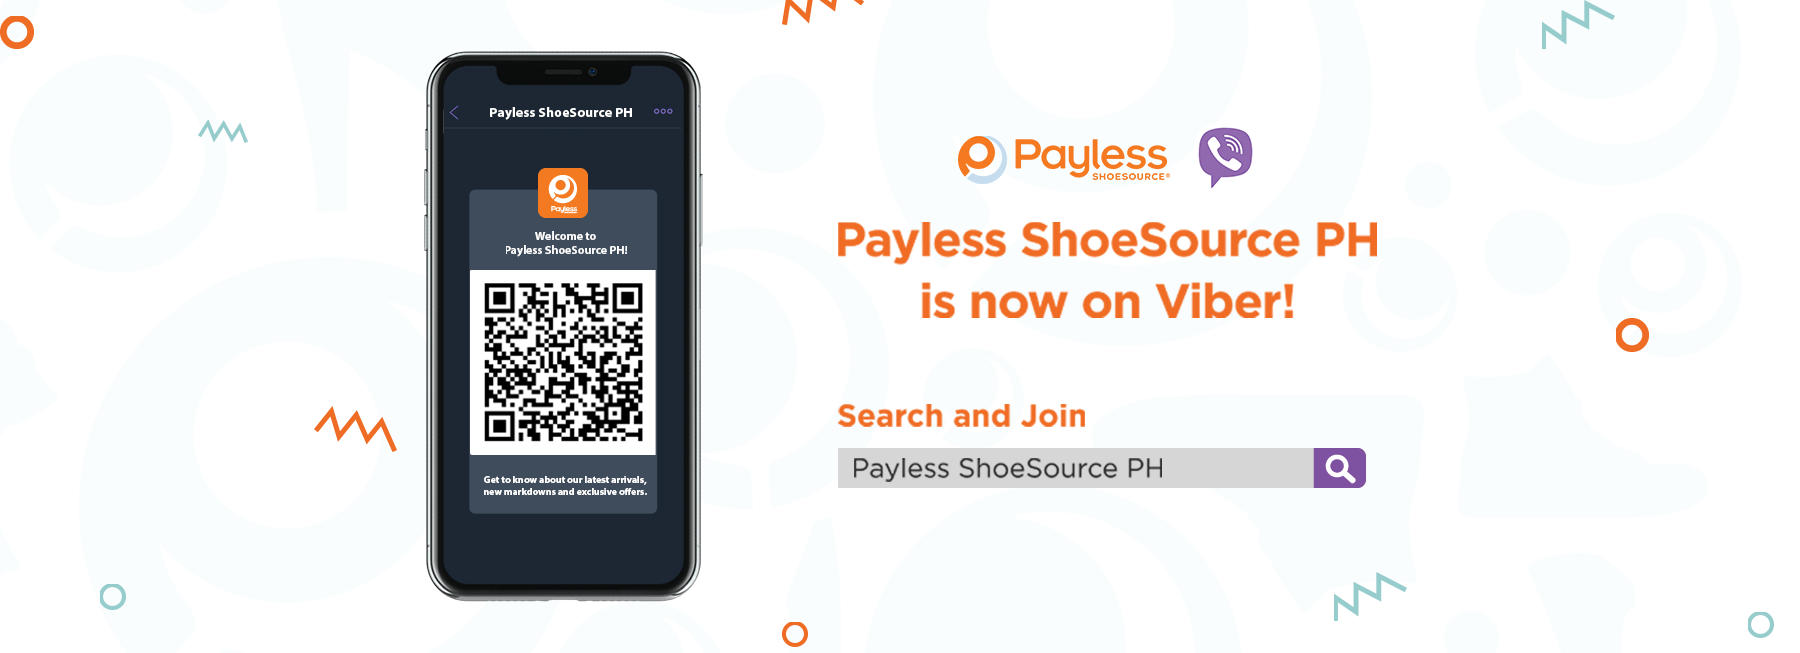 phone number to payless